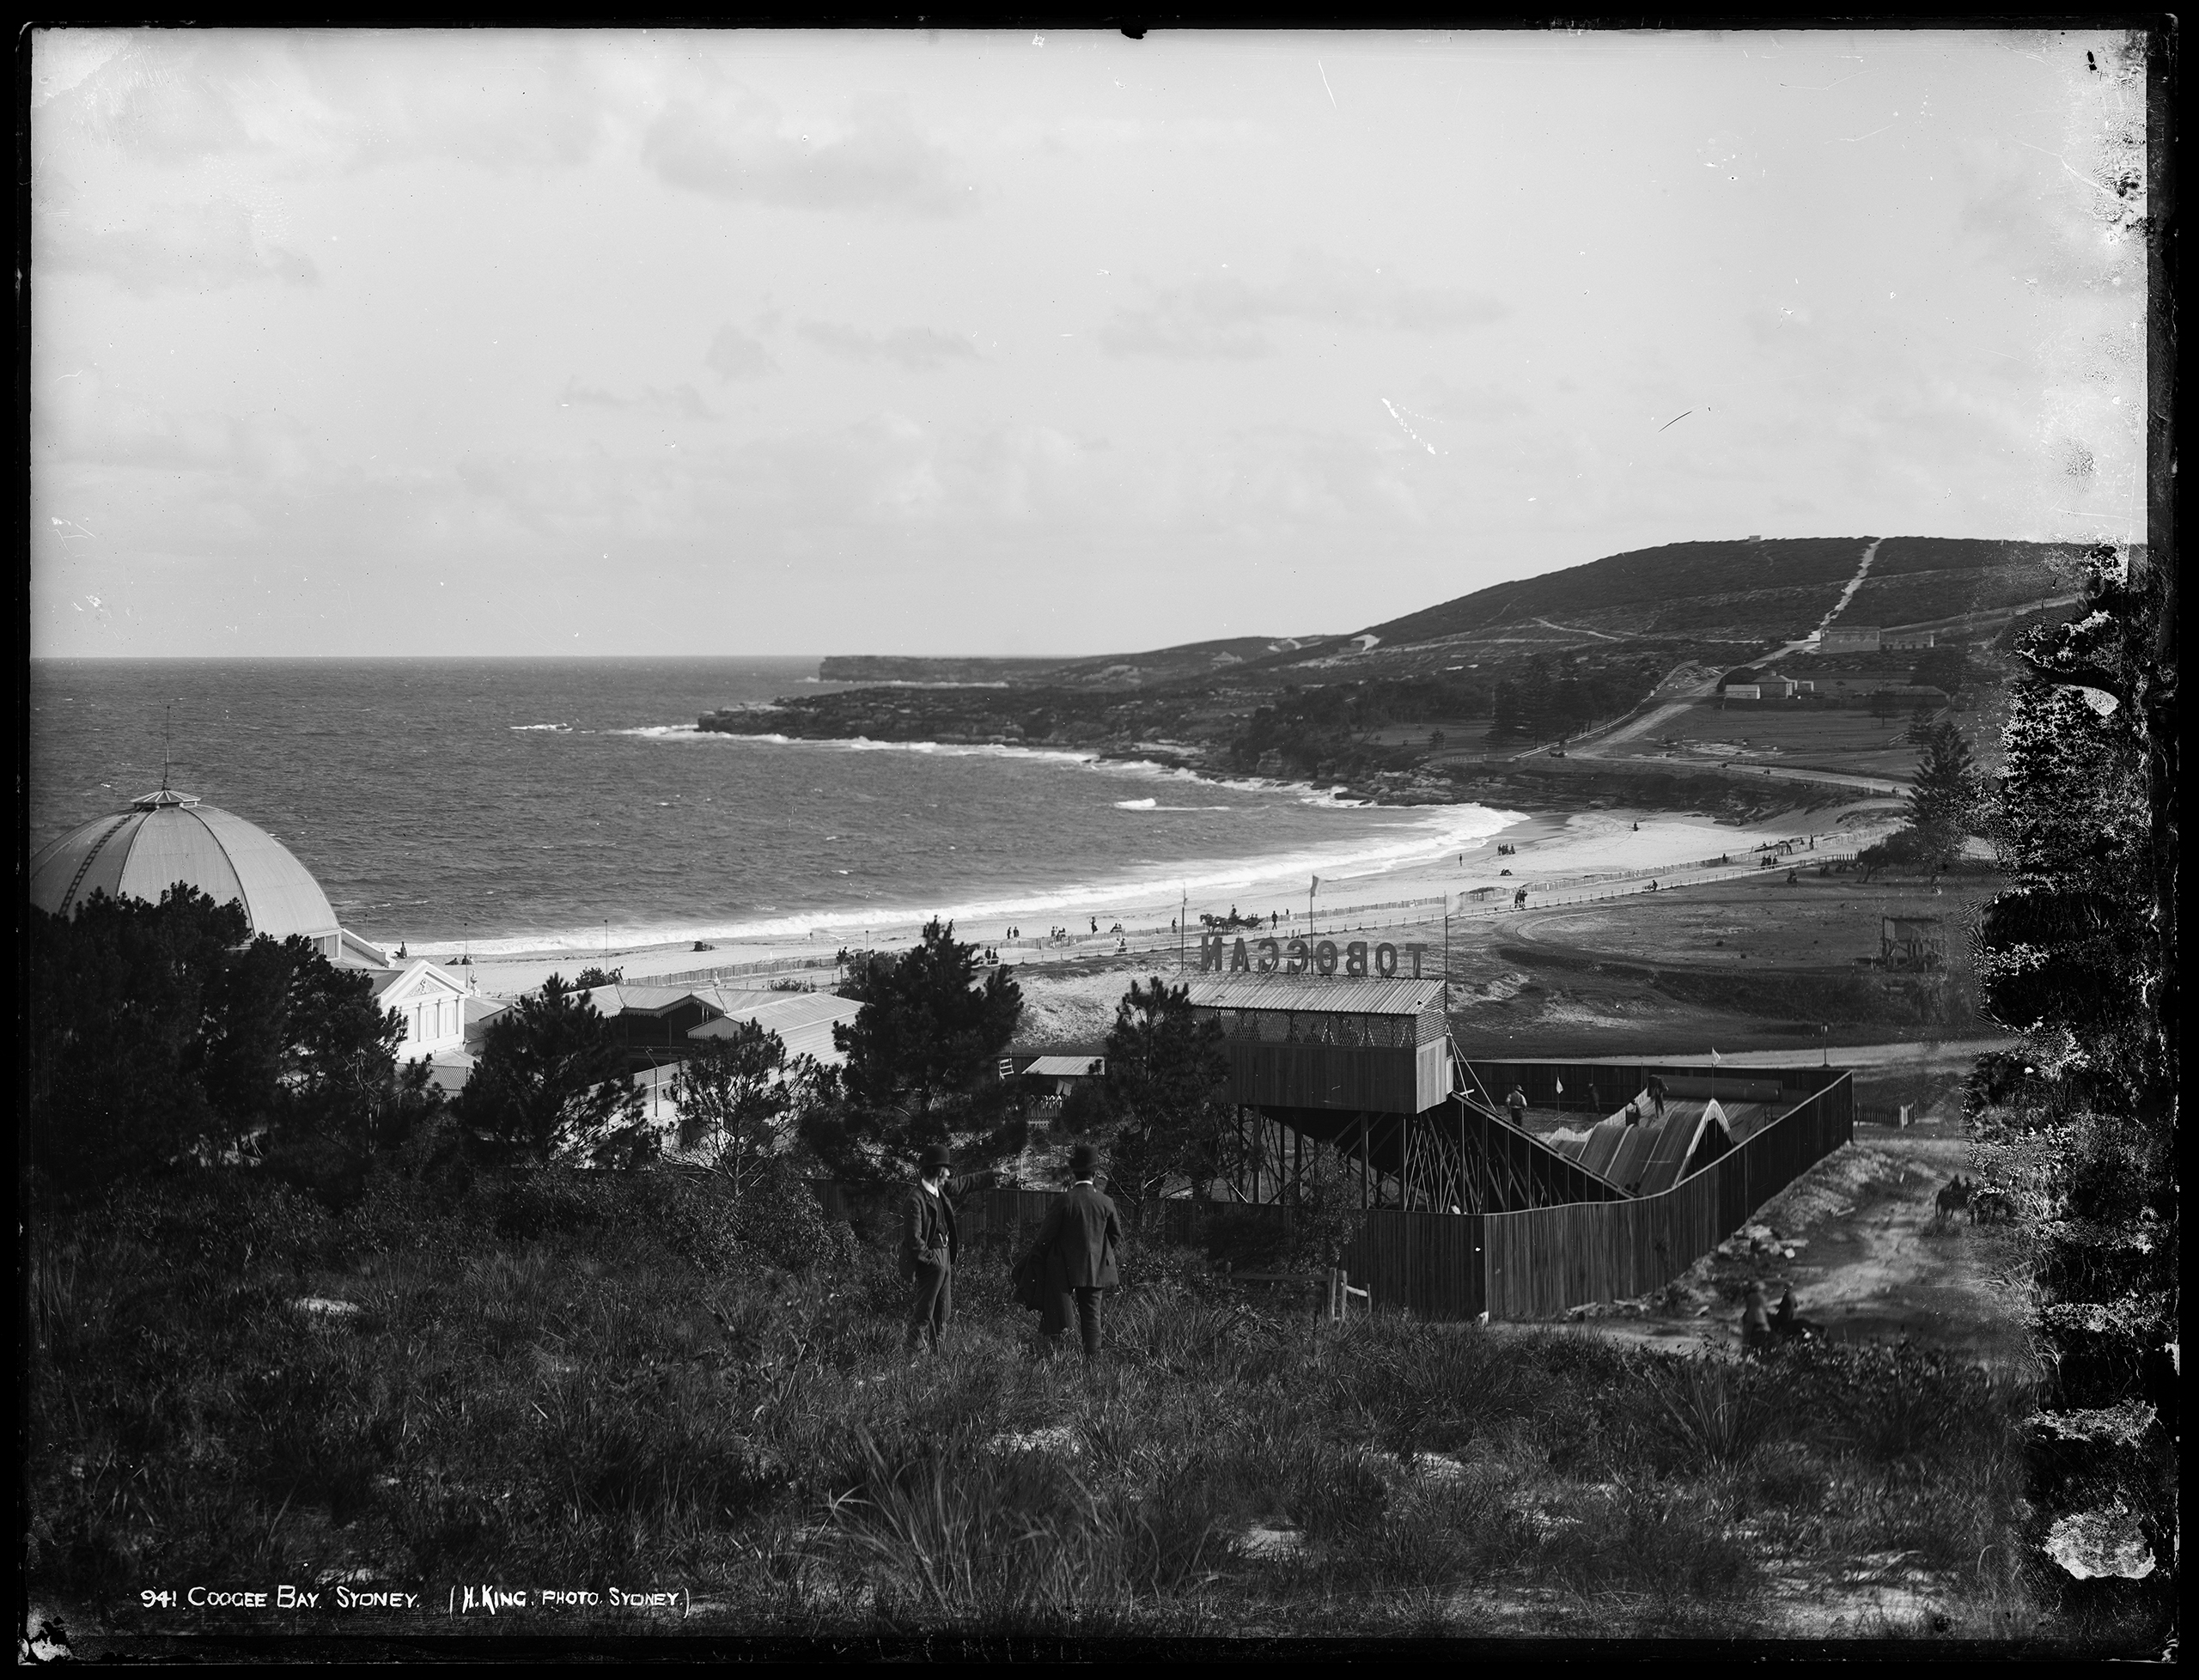 Glass plate negative of Coogee Bay photographed by Henry King